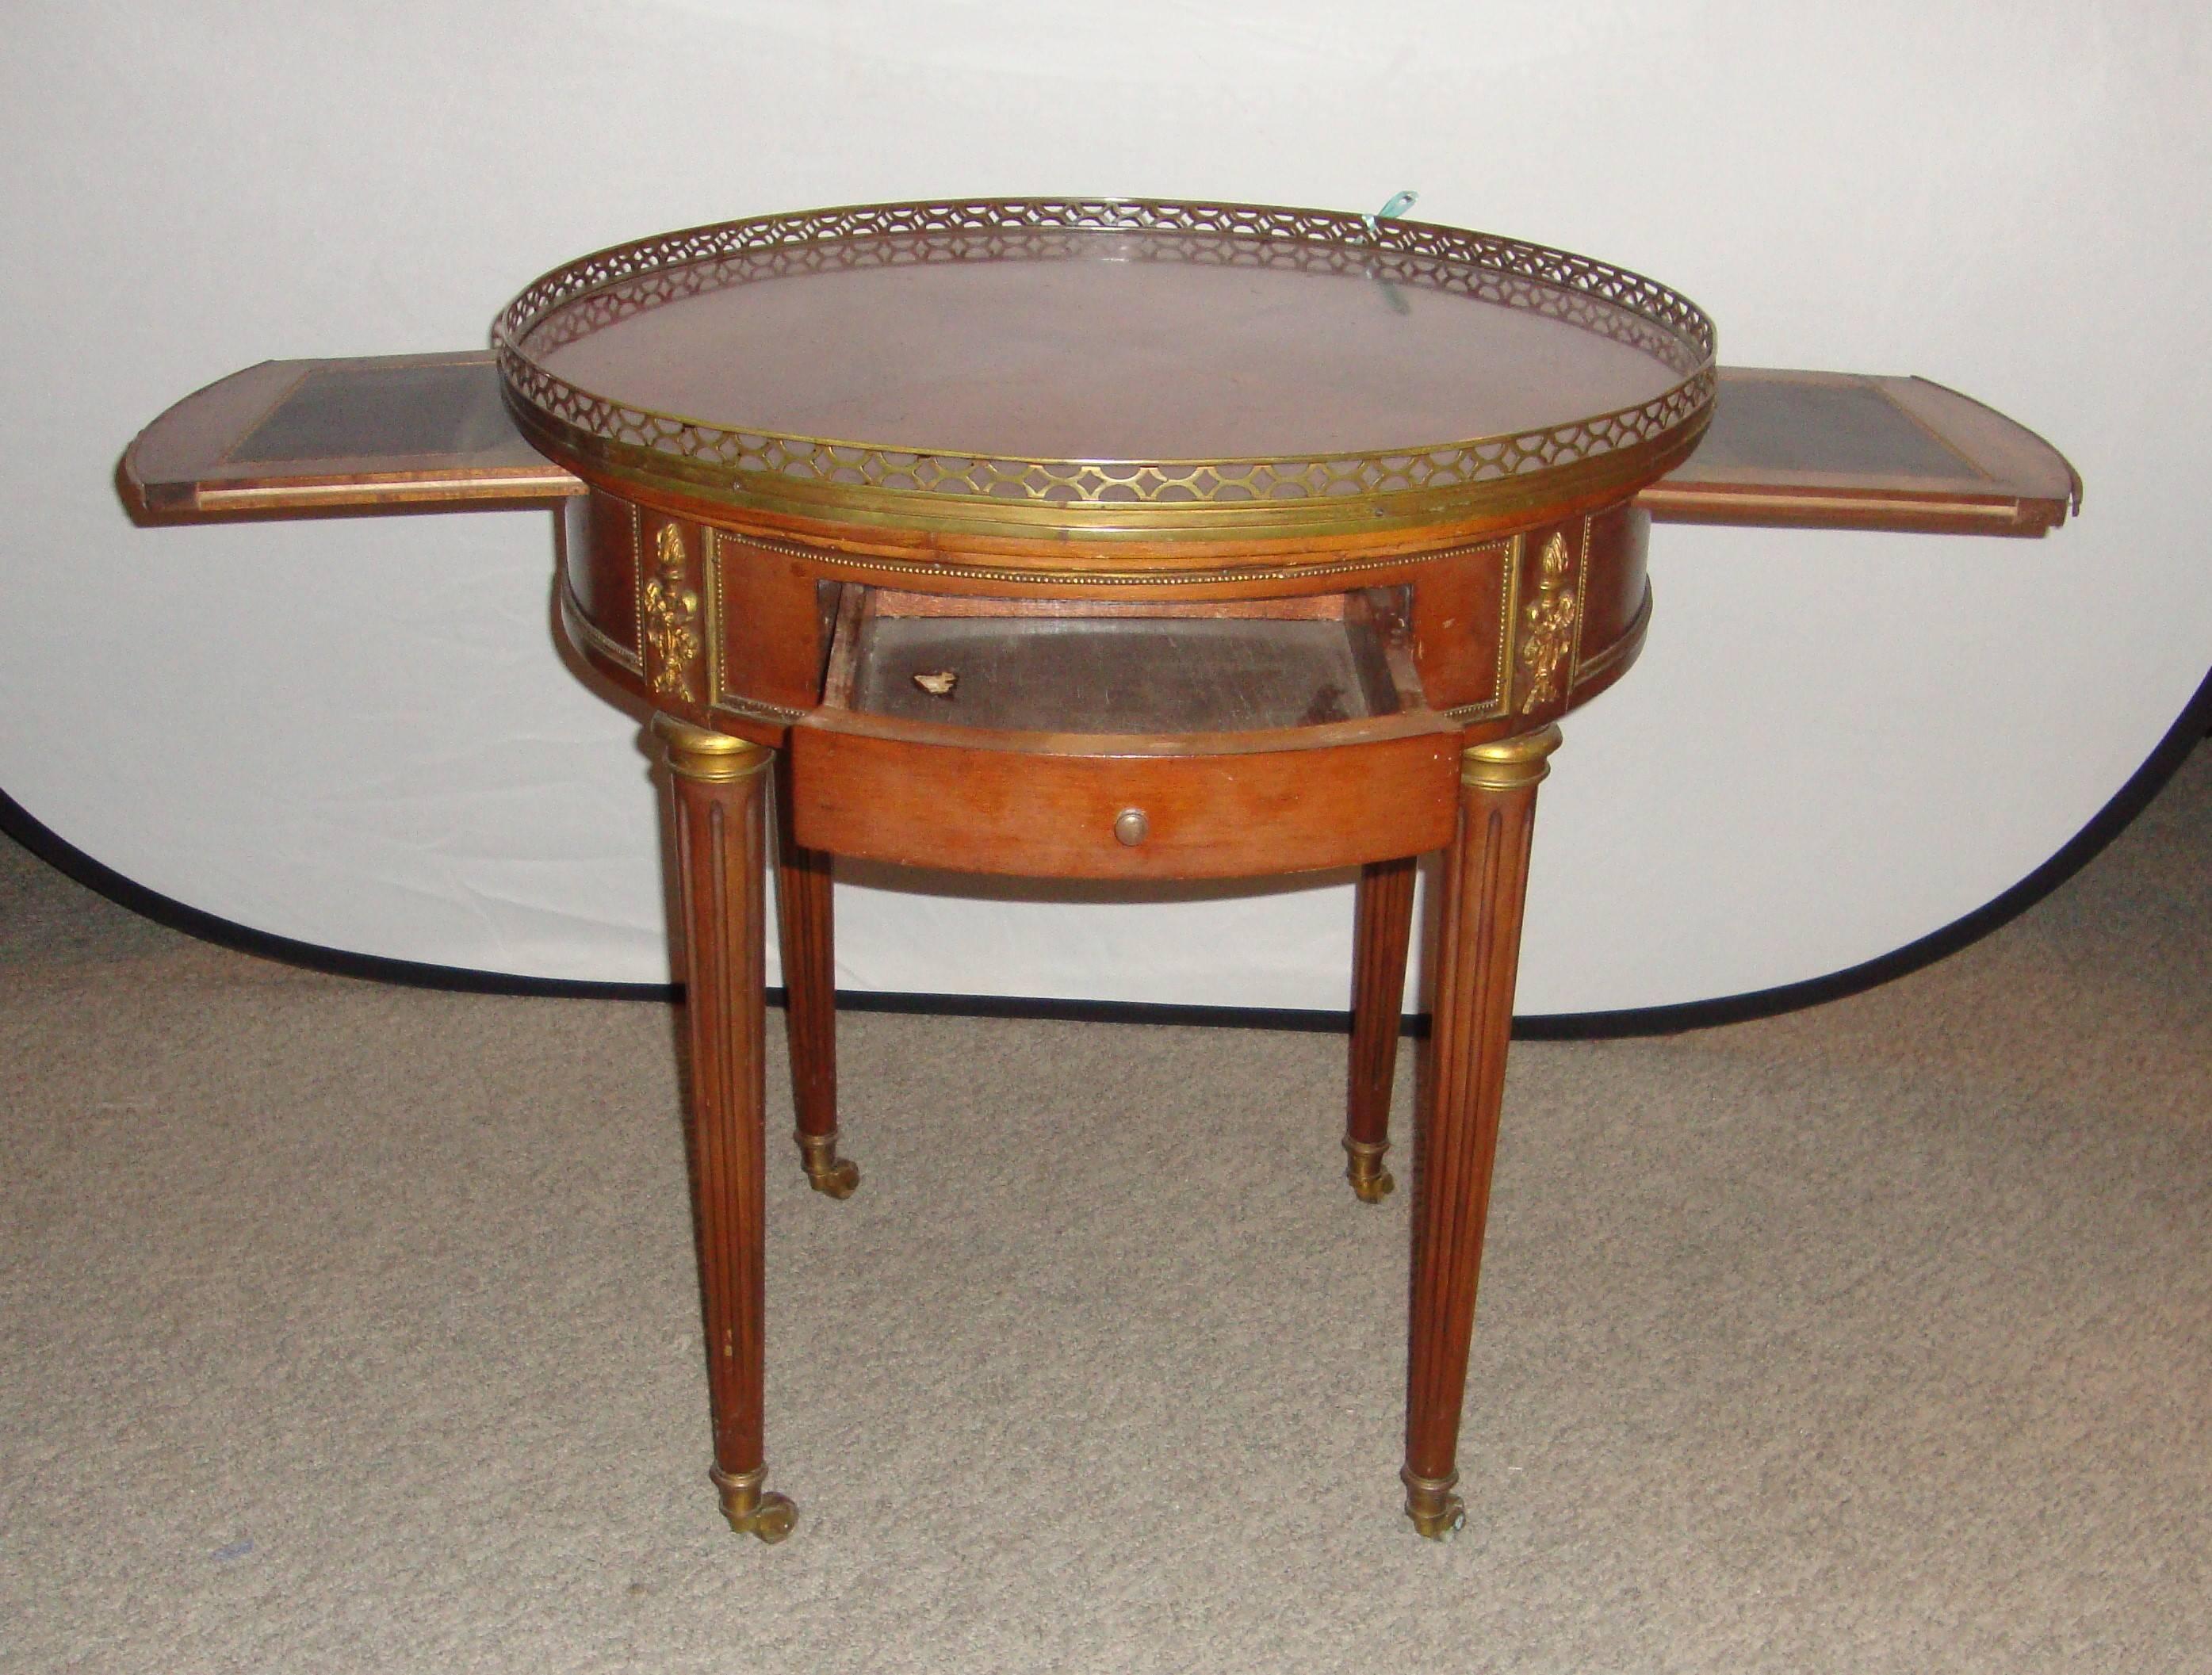 A French Louis XVI style mahogany Bouillotte table manner of Maison Jansen, with brass gallery. Having two pull our drawers and two pull-out extensions. Each pull-out extension measures 9 inches each.